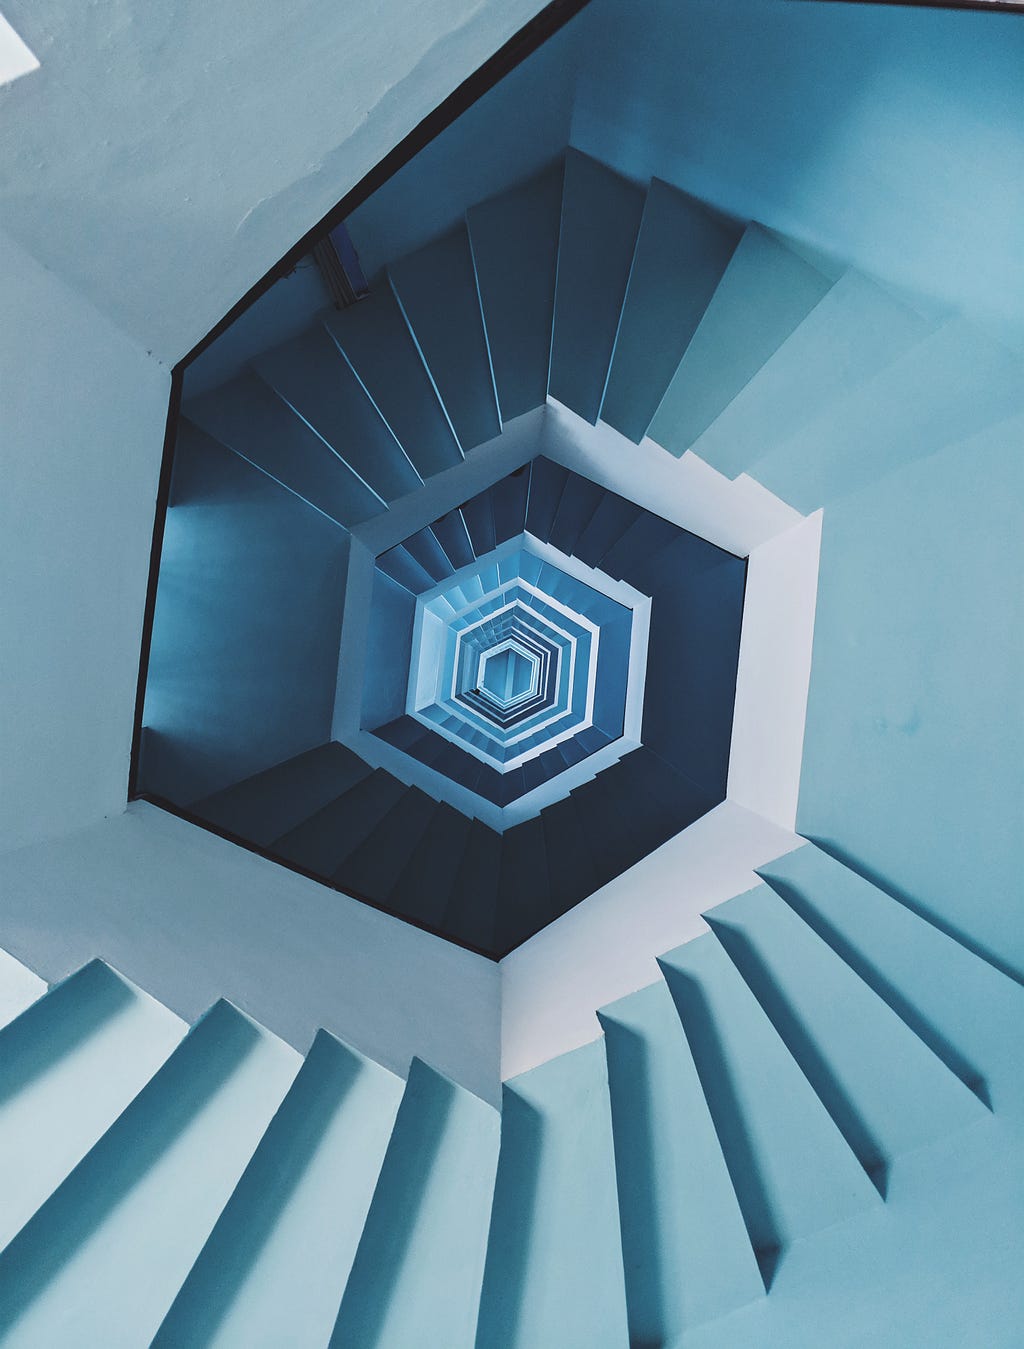 A photo of a view looking centrally down a blue hexagonal staircase that looks like it continues forever.